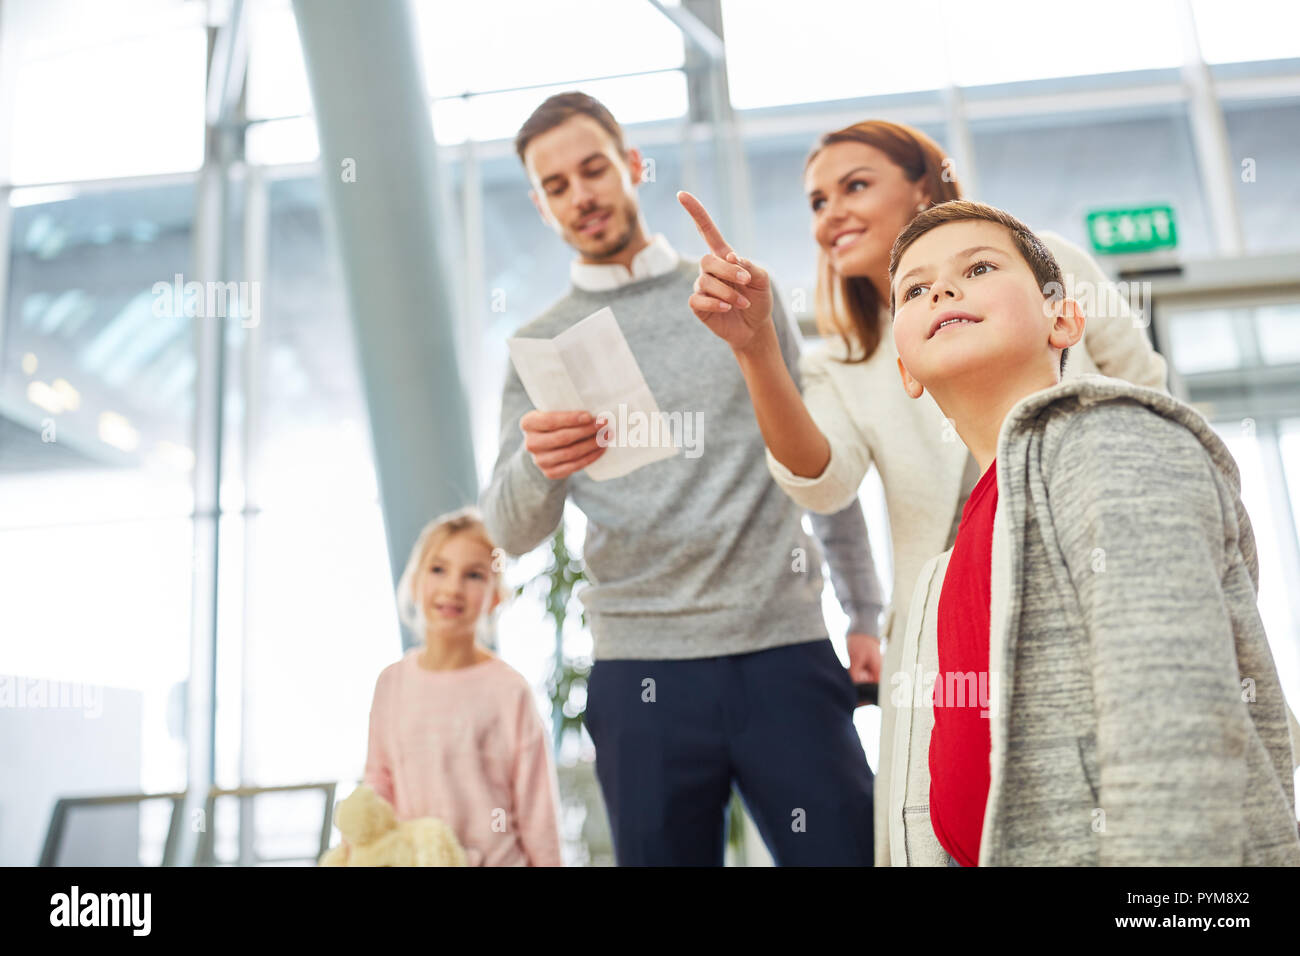 Happy family and two children eagerly look for the right gate in the airport terminal Stock Photo